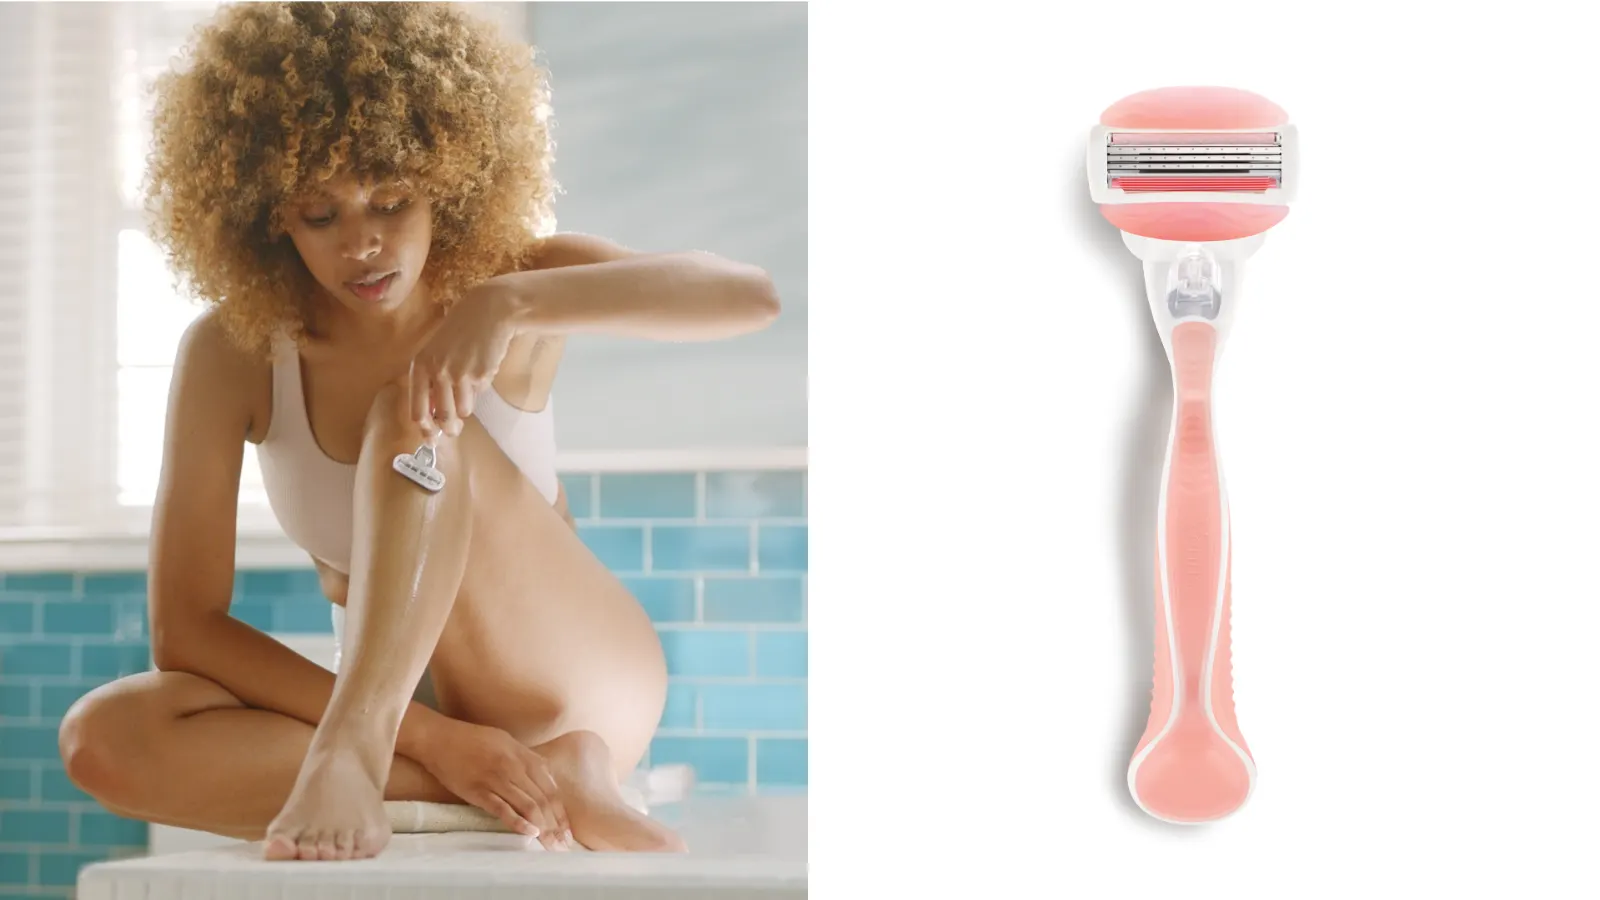 Woman shaving her leg with a razor in a bathroom and a pink razor with an oval razor head on a white background